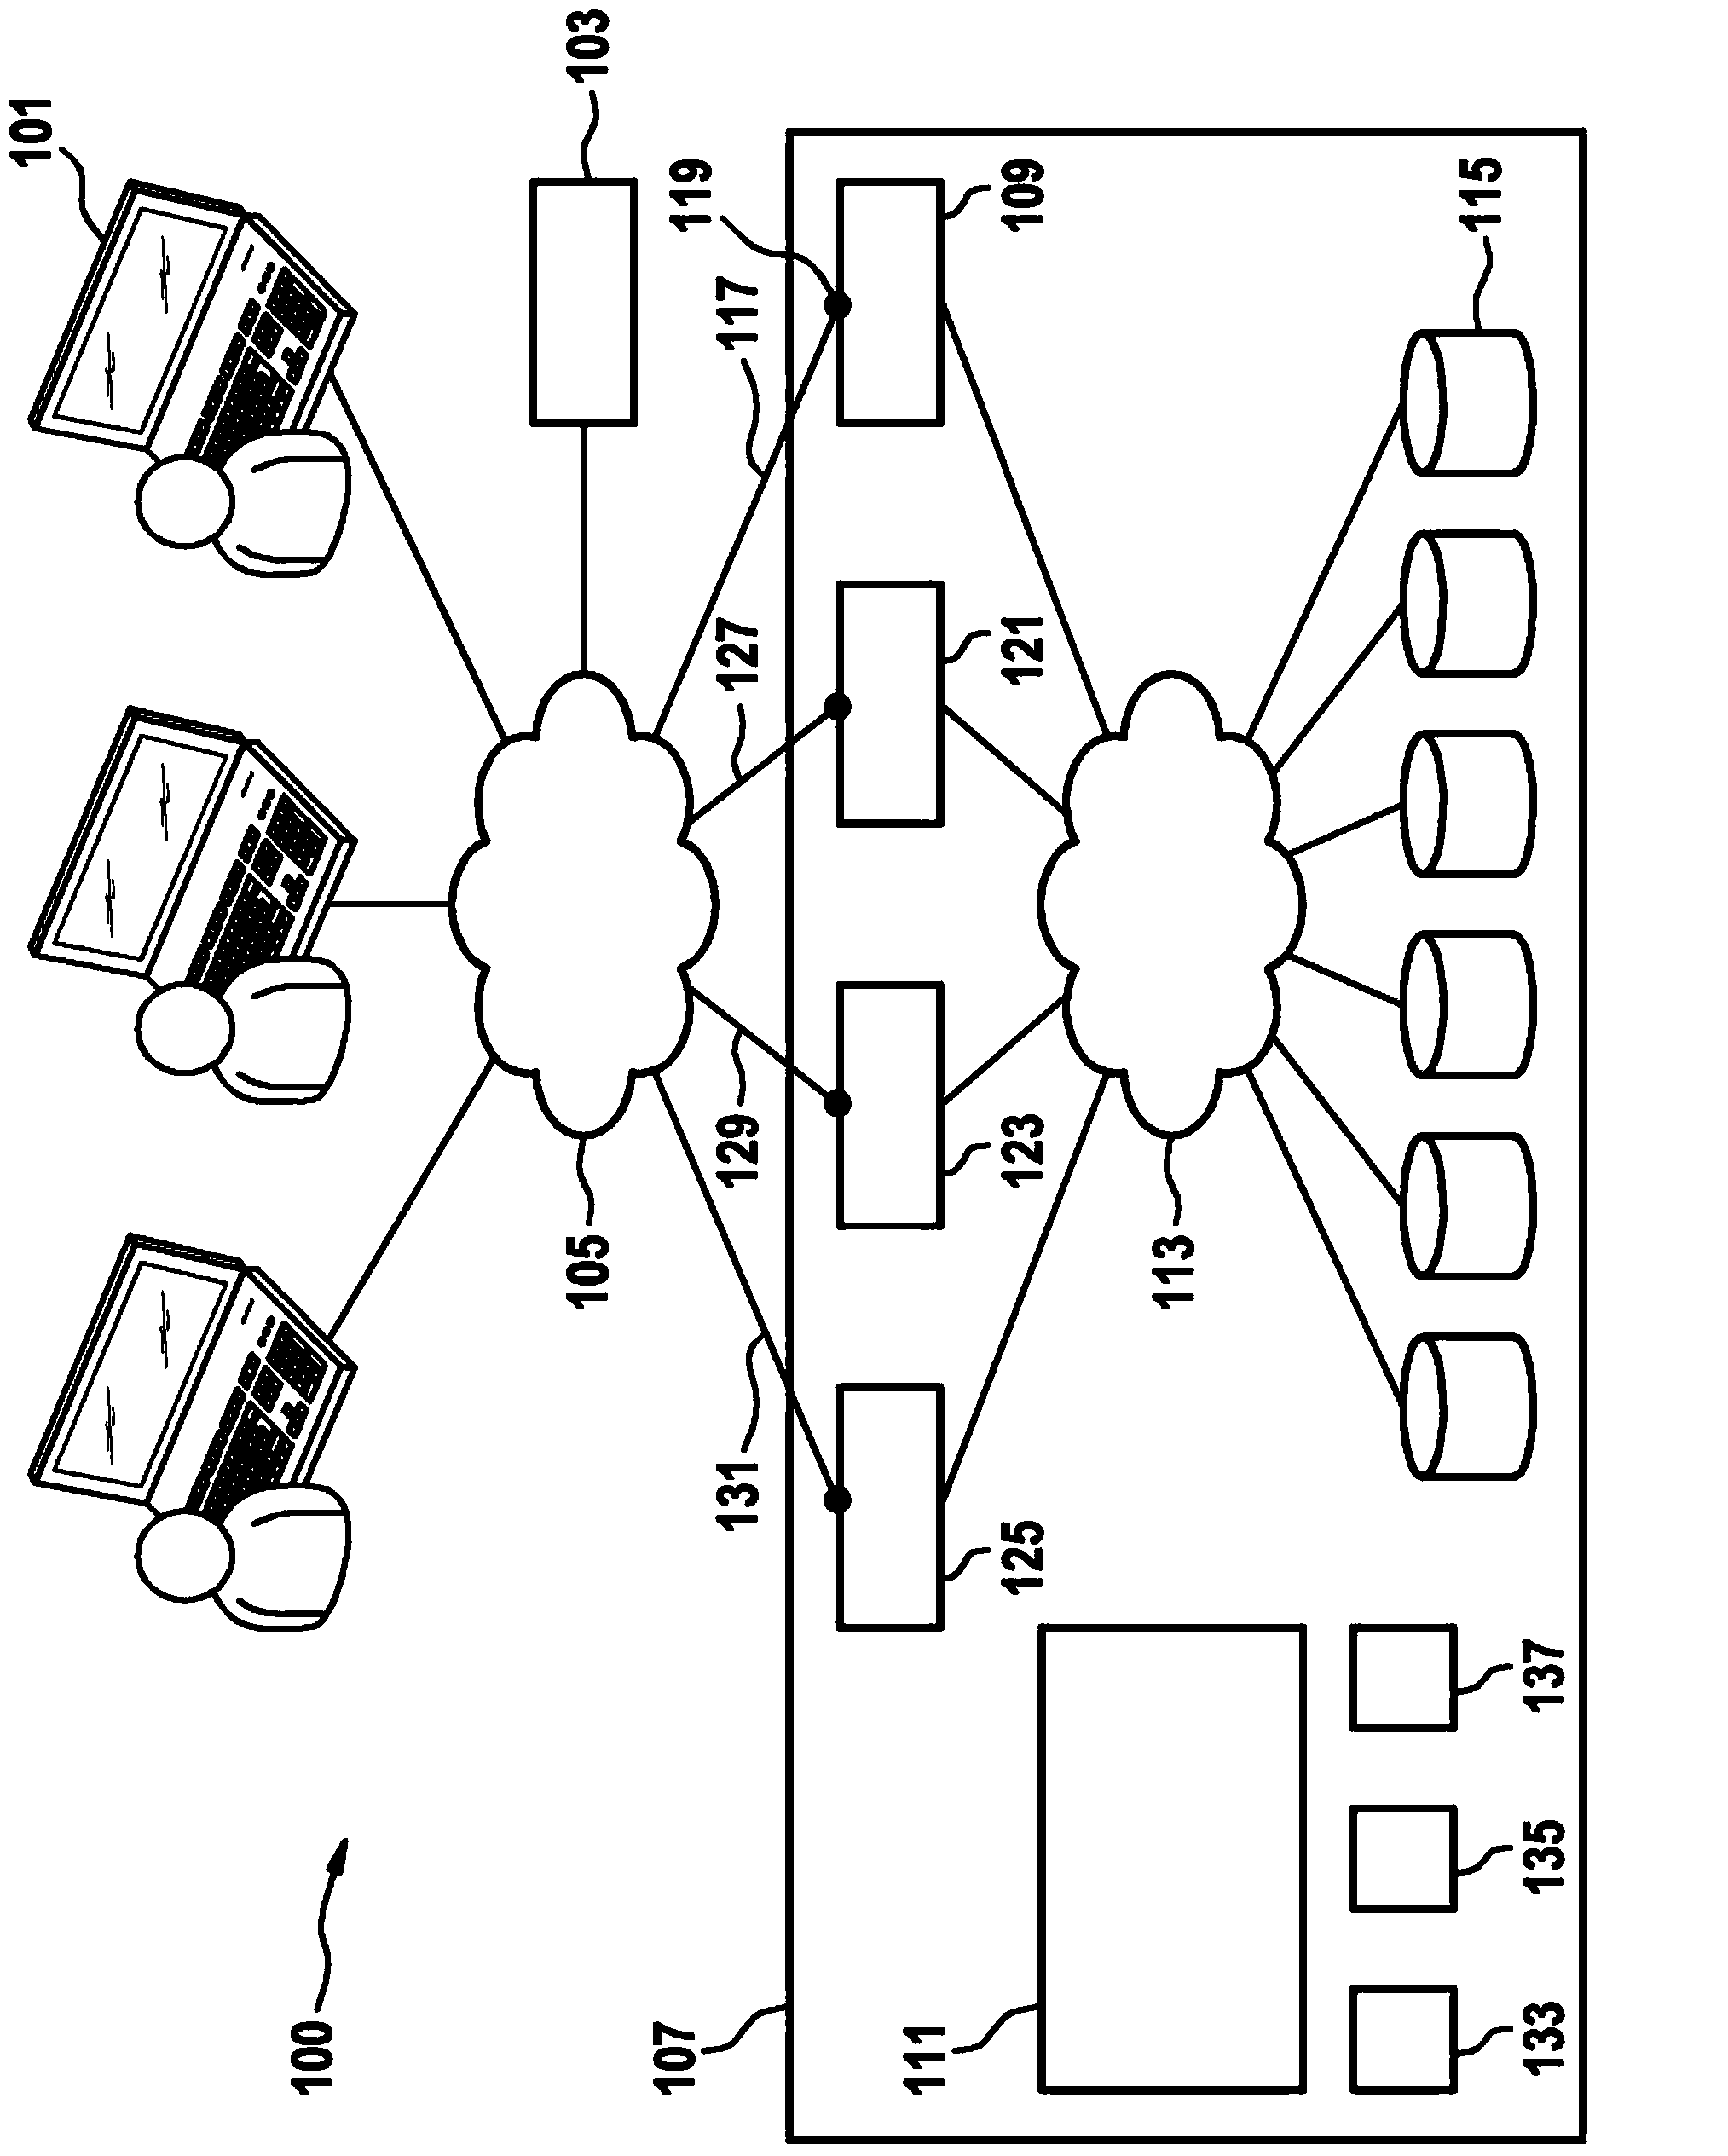 Method for controlling access of clients to a service in a cluster environment